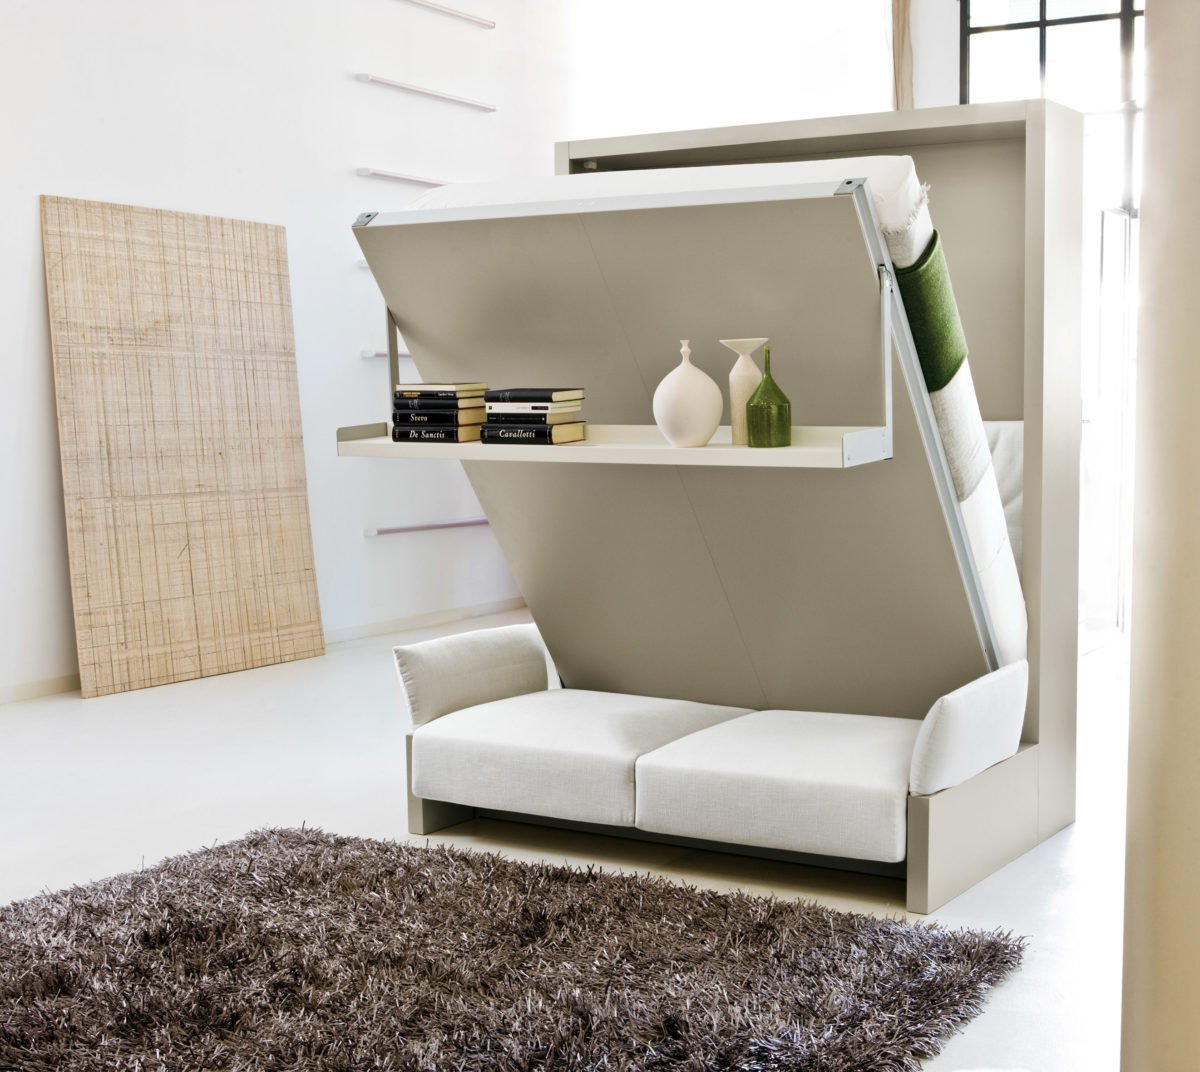 furnish-apartment-very small-bed-container